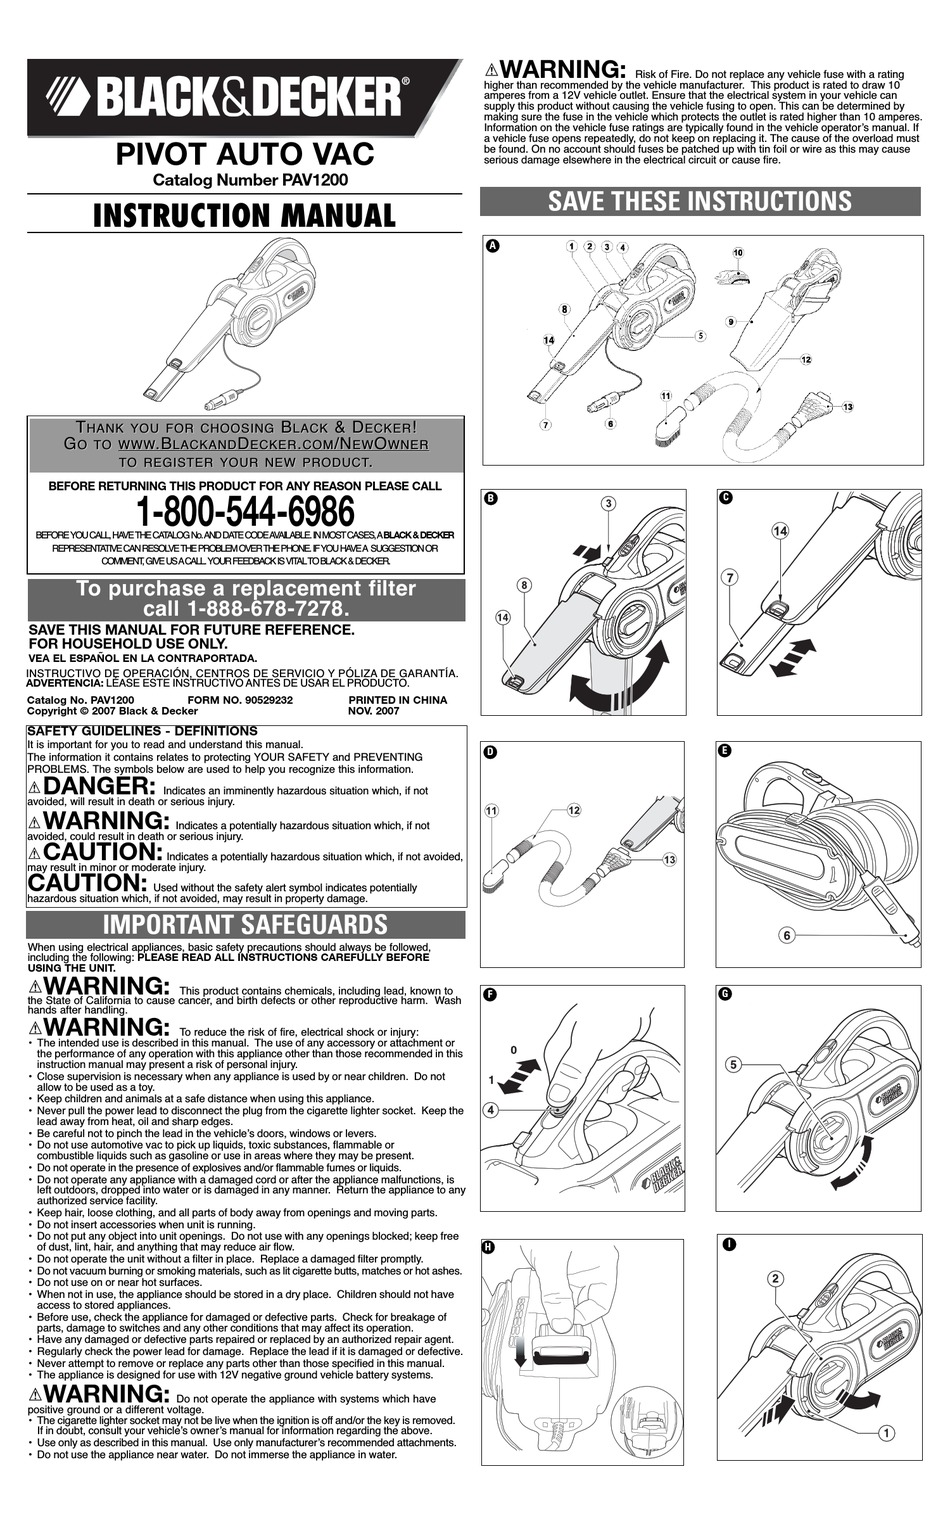 User manual Black & Decker GL653 (English - 12 pages)